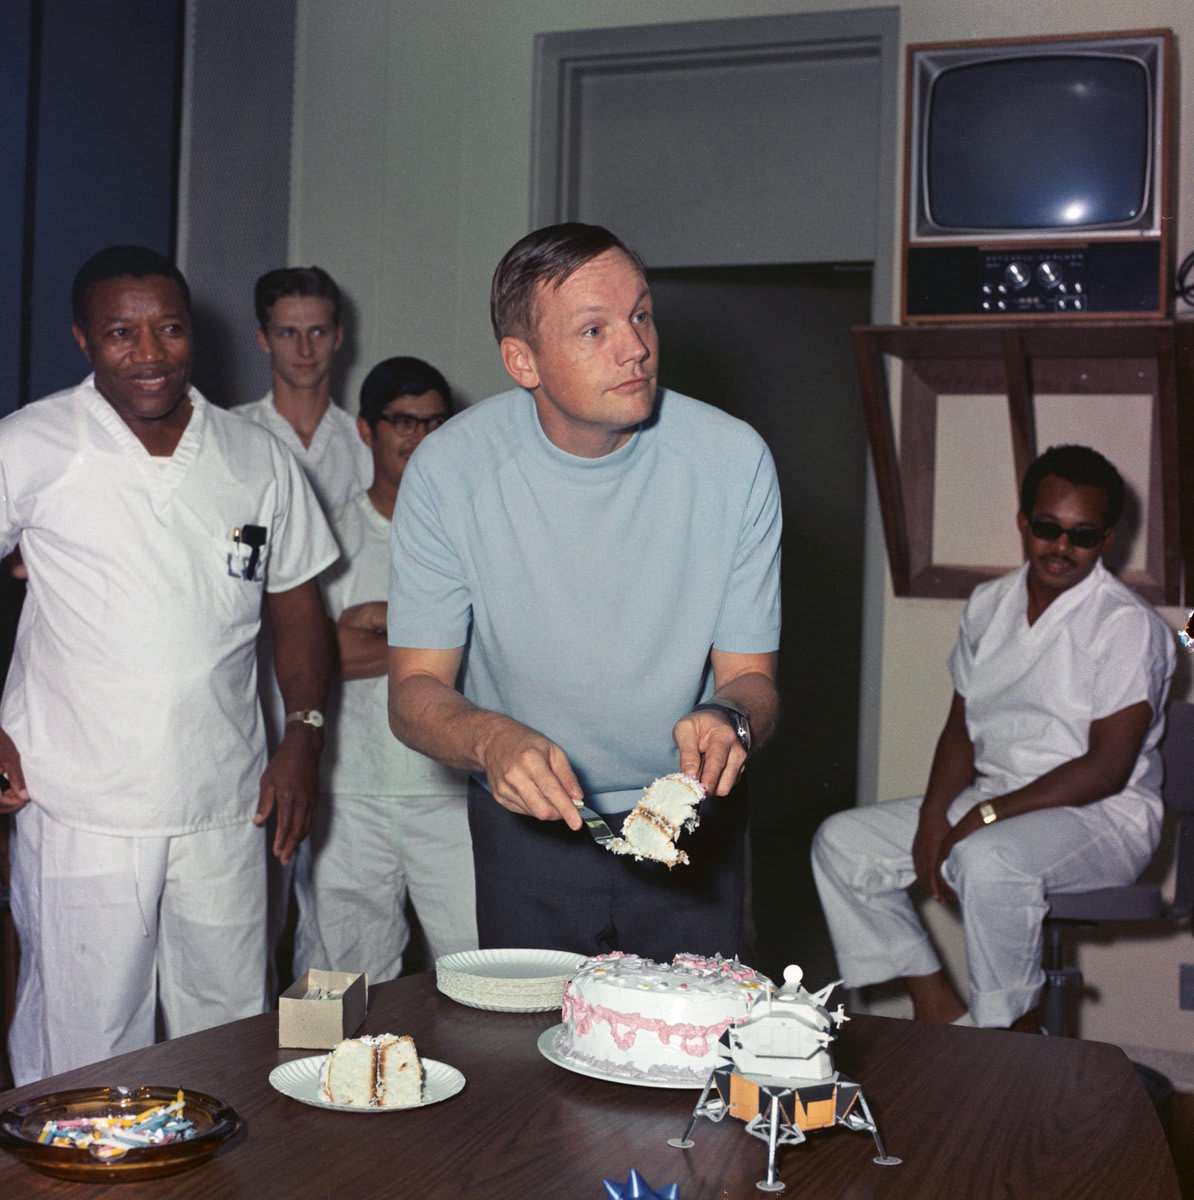 On this day in 1969, Neil Armstrong celebrated his 39th birthday while in quarantine following the Apollo11 mission. The party was complete with a "happy birthday" song, vanilla cake, and a champagne toast.